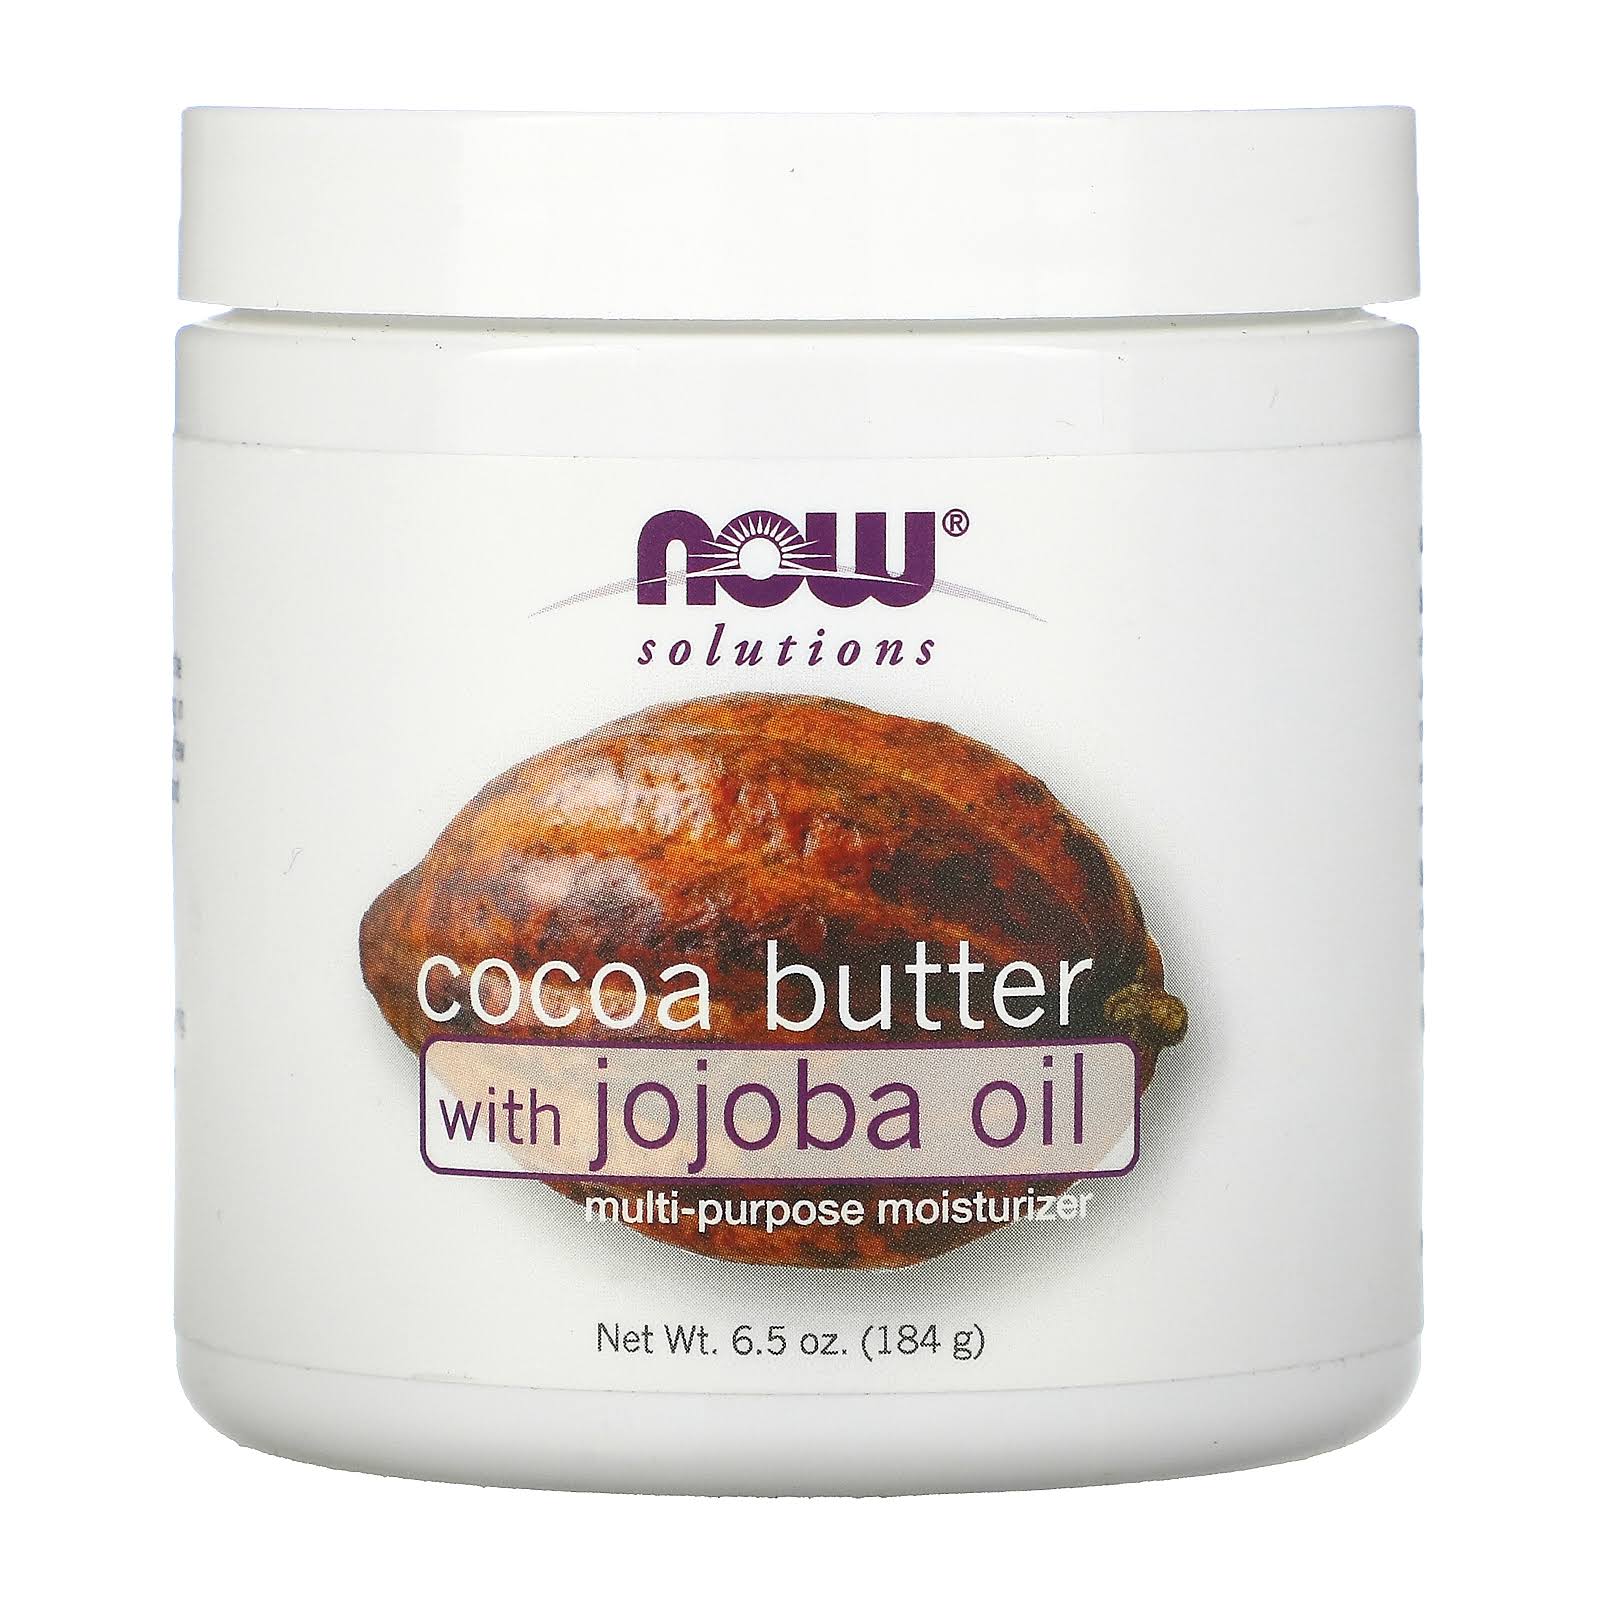 Now Foods Solutions Cocoa Butter with Jojoba Oil - 192ml